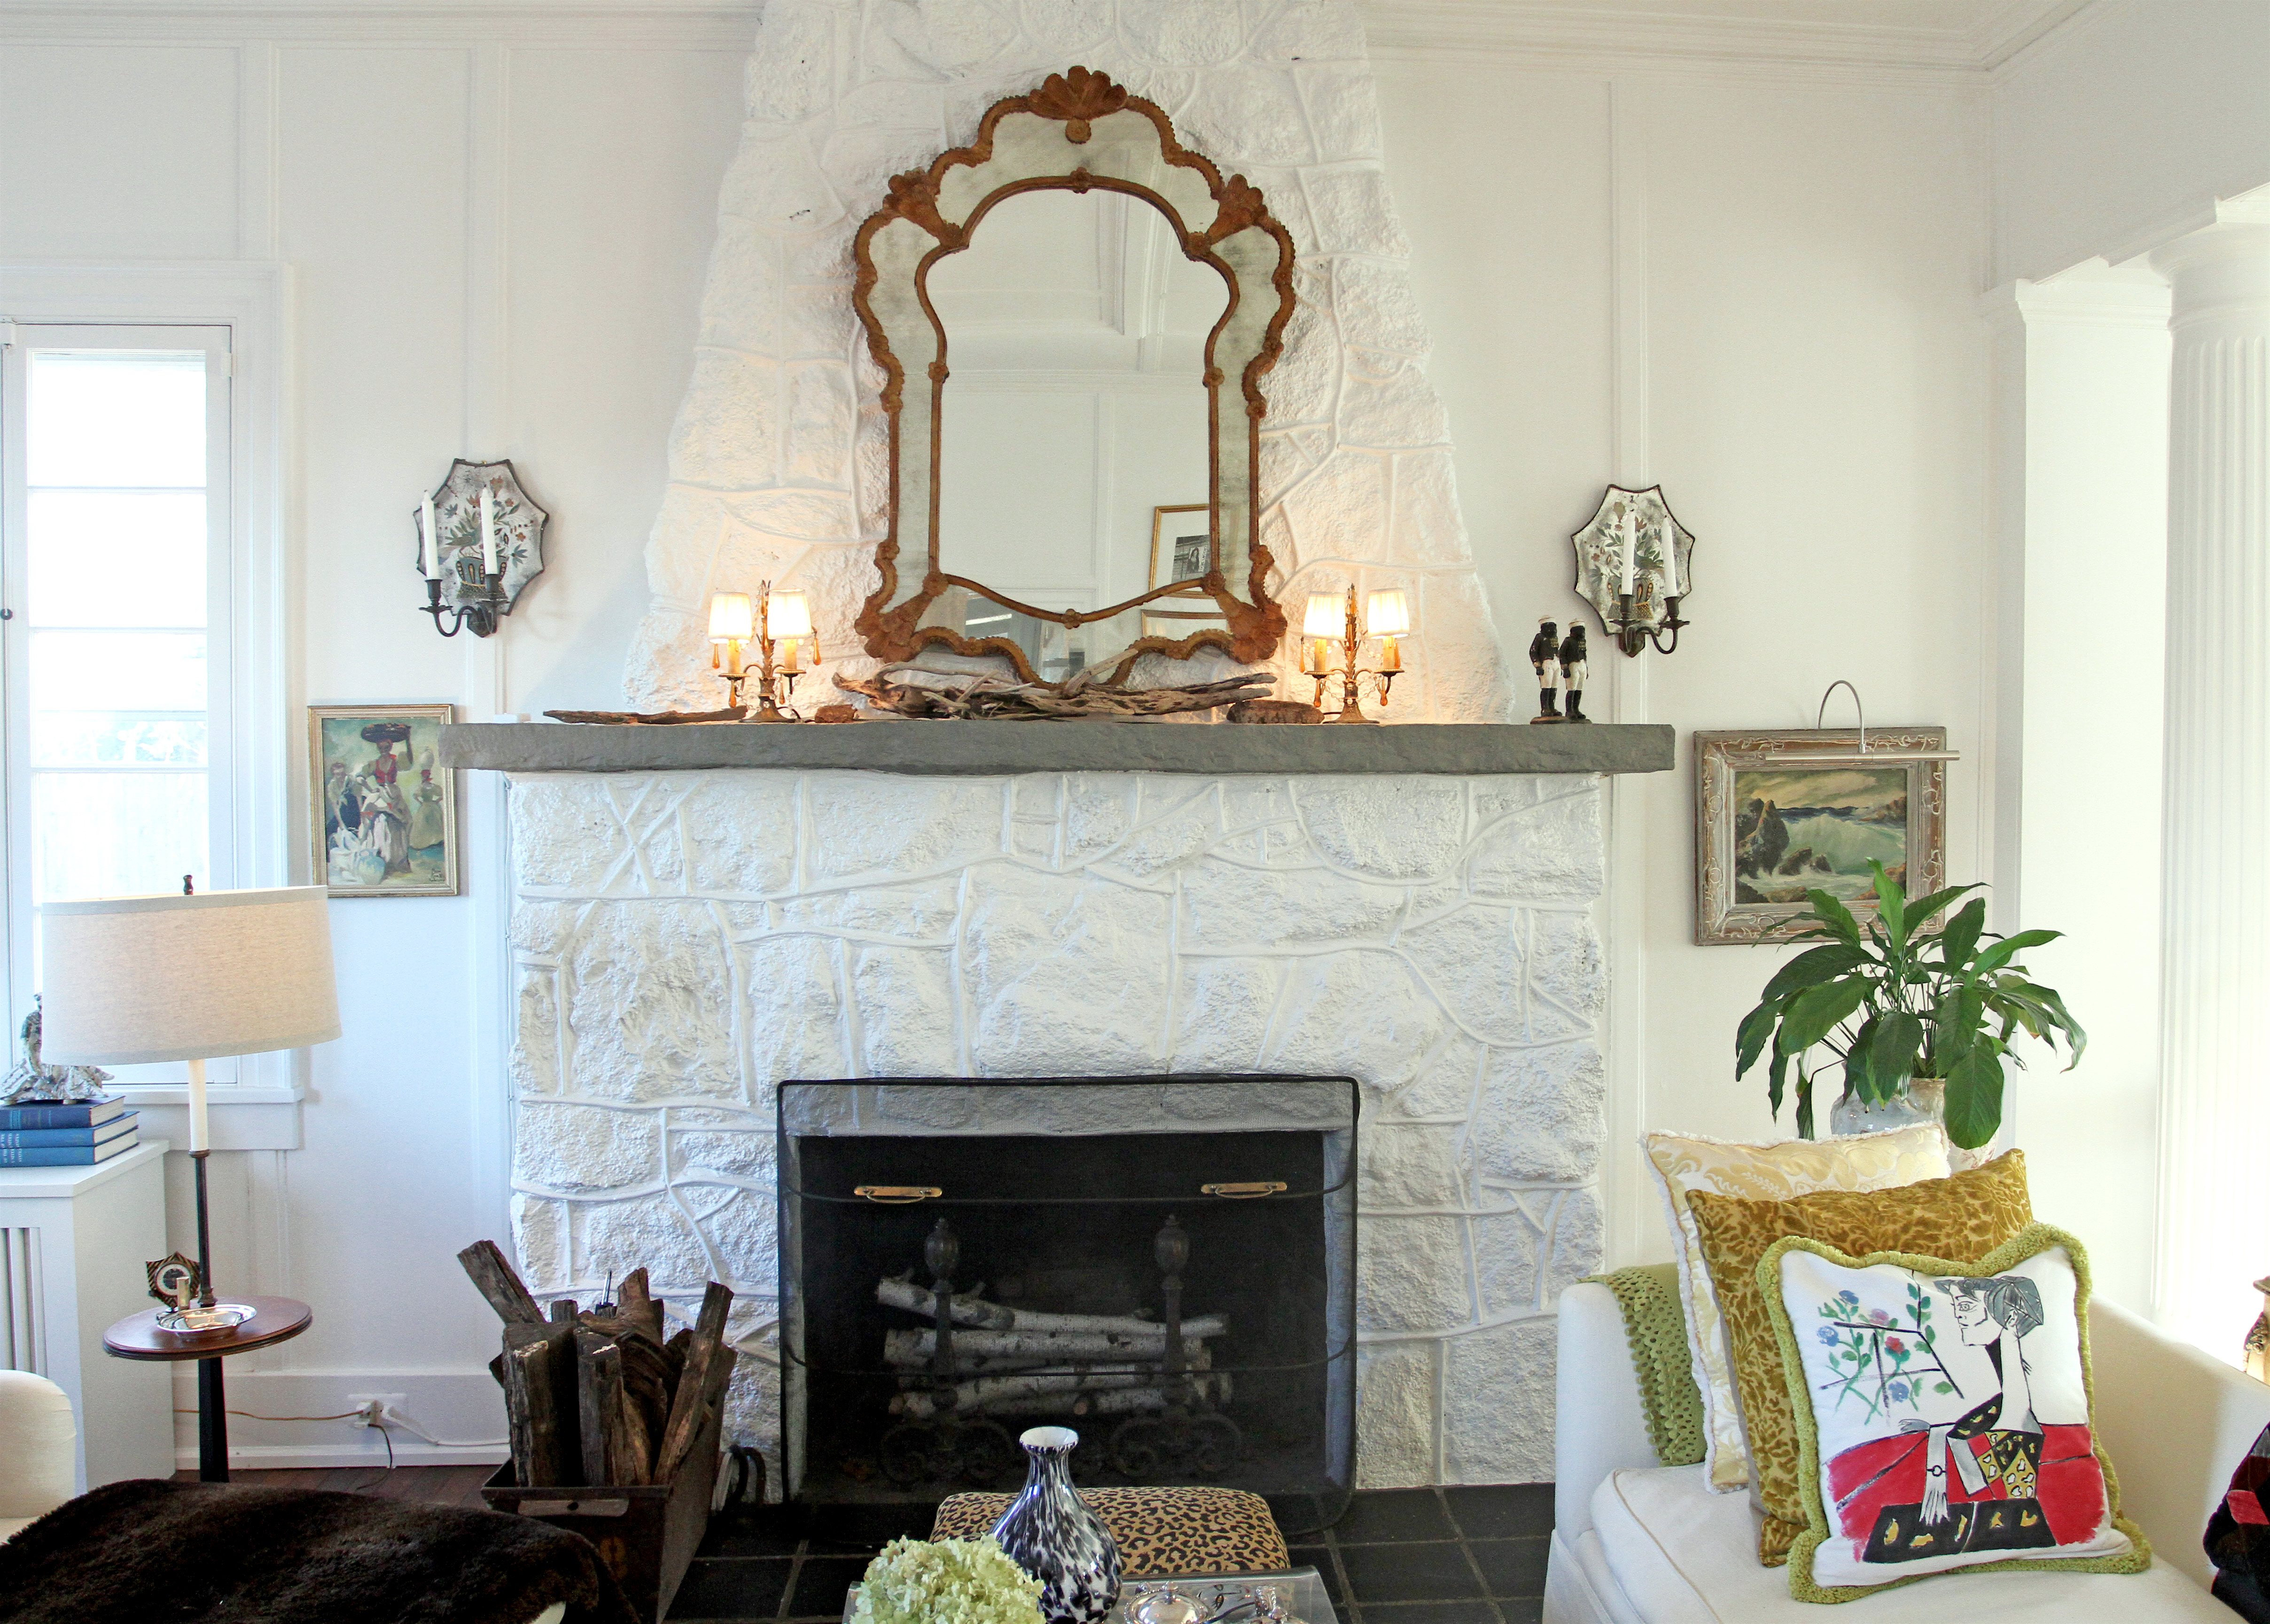 Nancy Keyes' formerly brown stone fireplace, now painted a pristine white